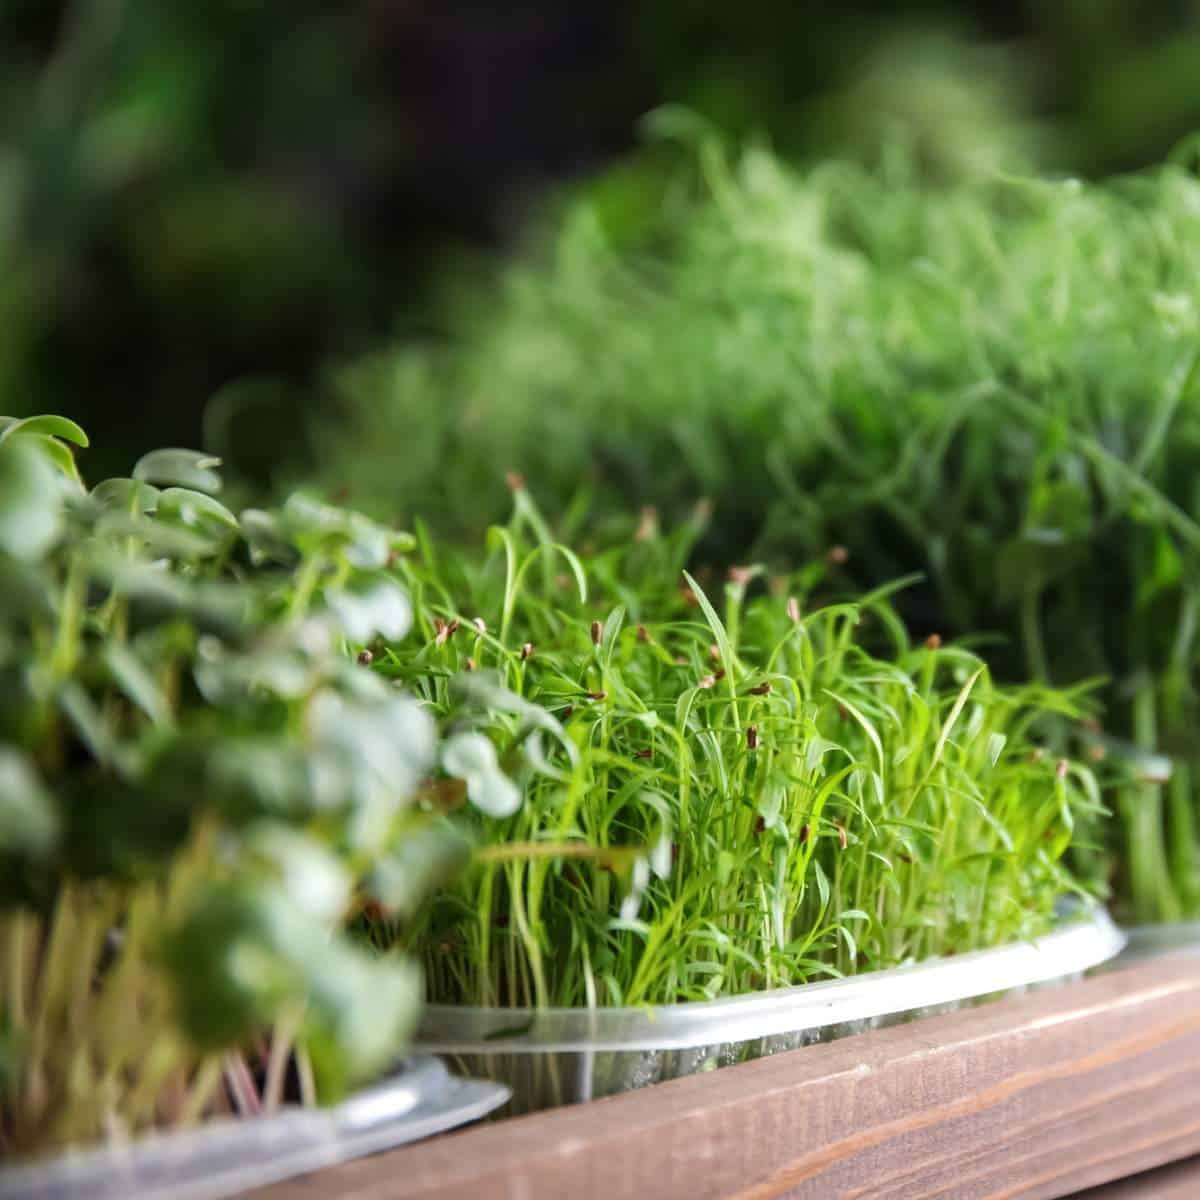 Small pots of microgreens on a wooden table.